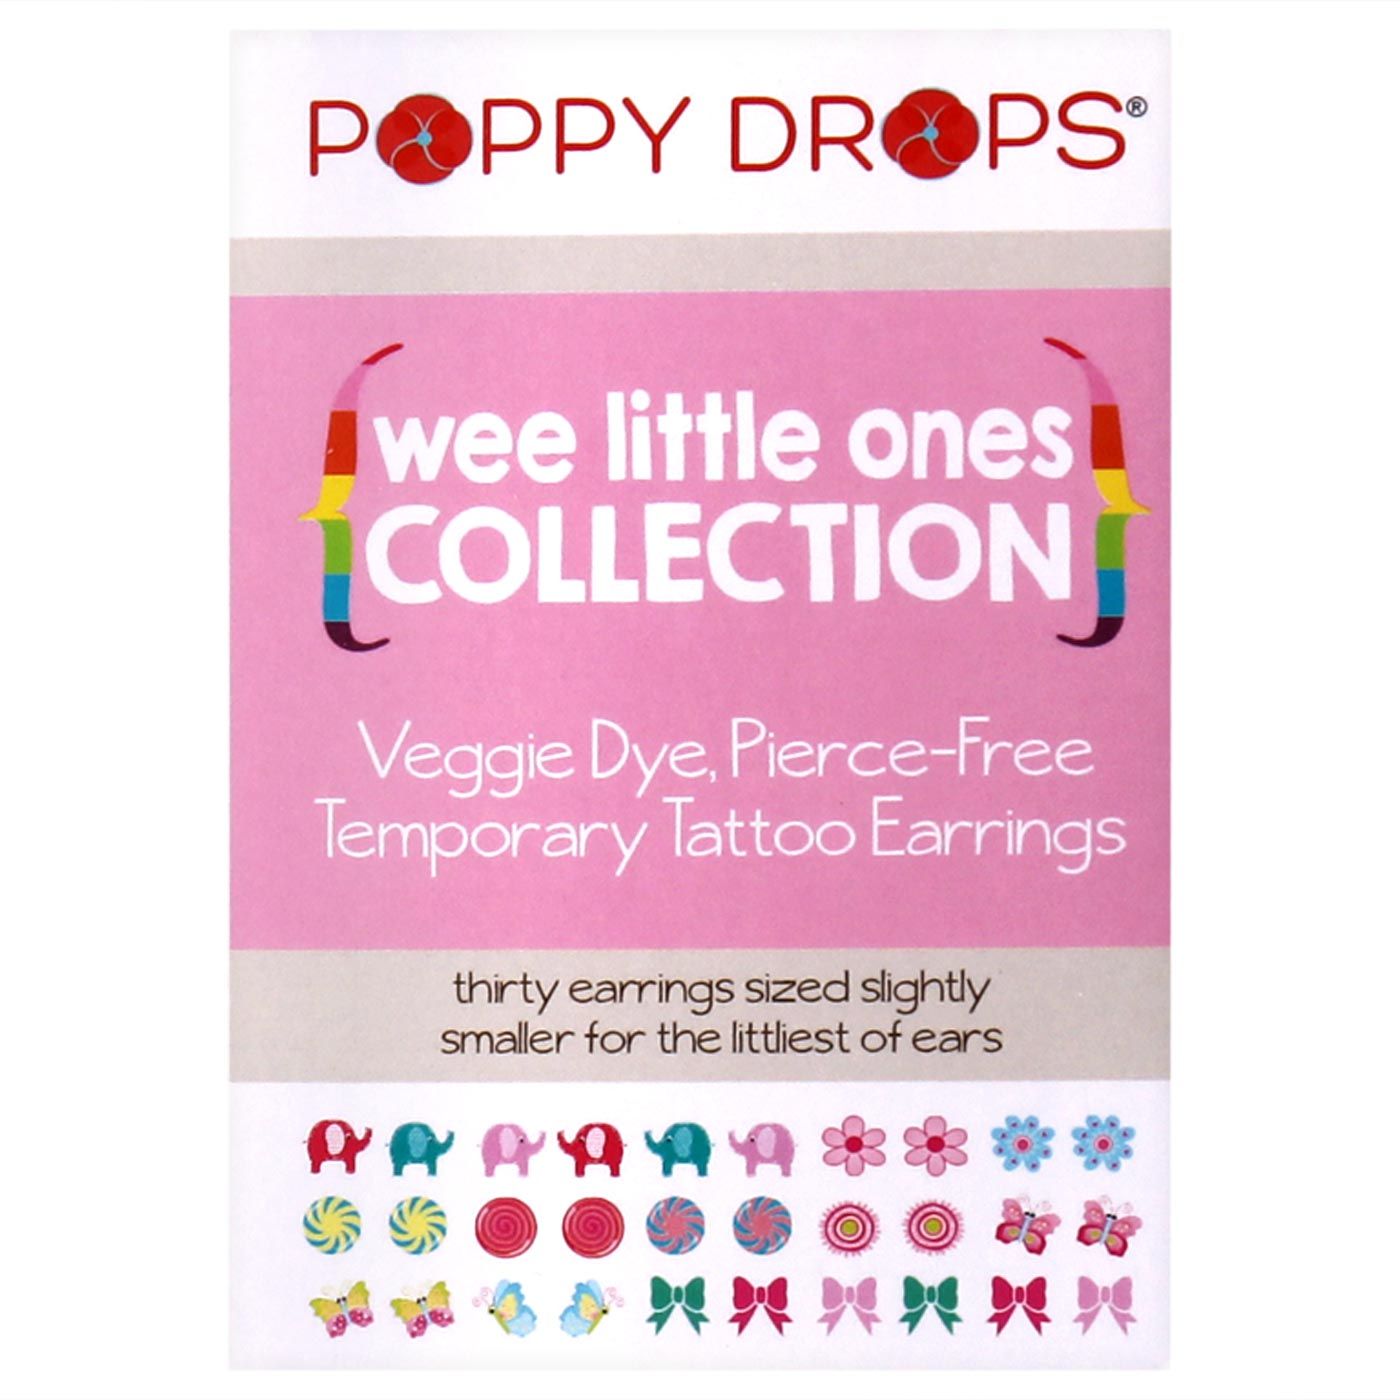 Poppy Drops Pierce-Free Earring Collection Wee Little Ones - 1